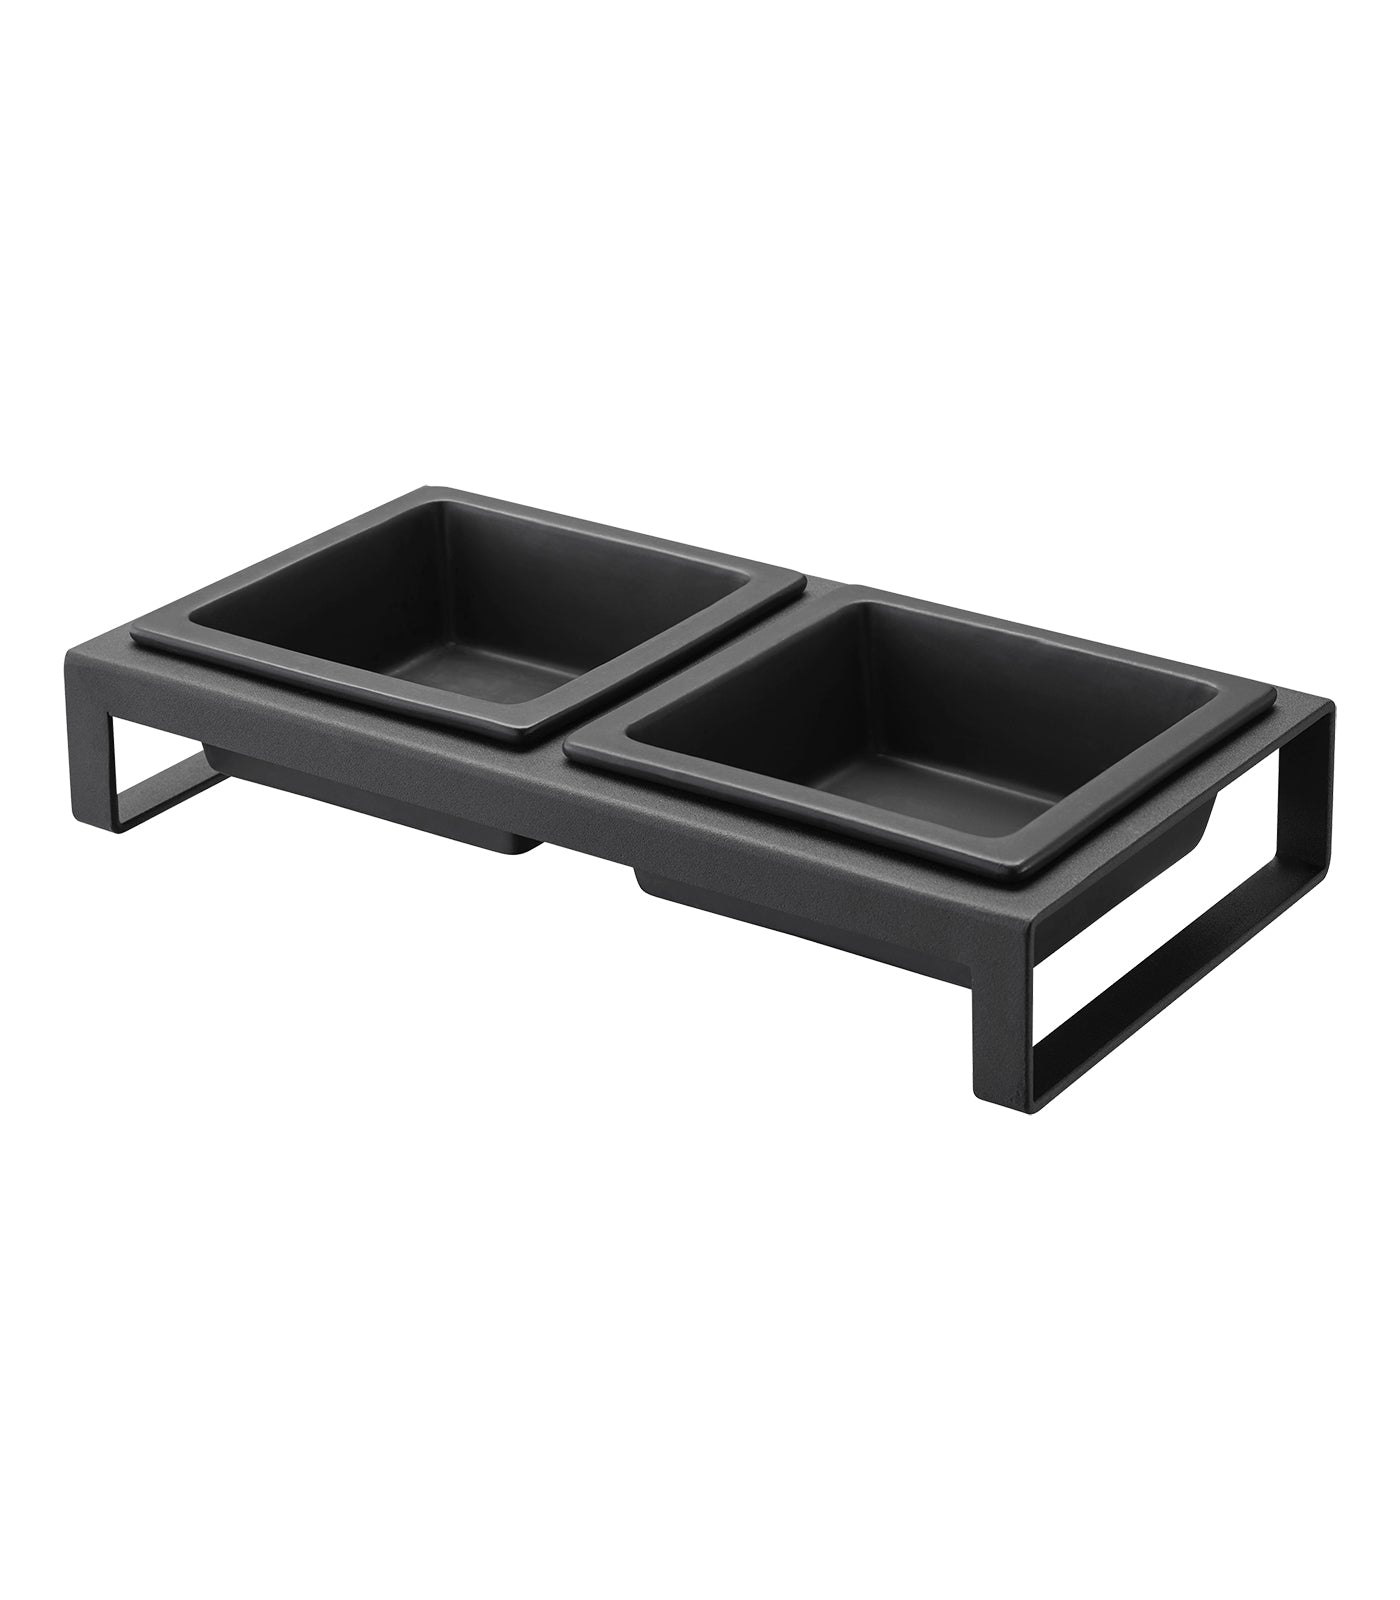 A black tray with two Yamazaki Home ceramic pet food bowls on it, perfect for small dogs.